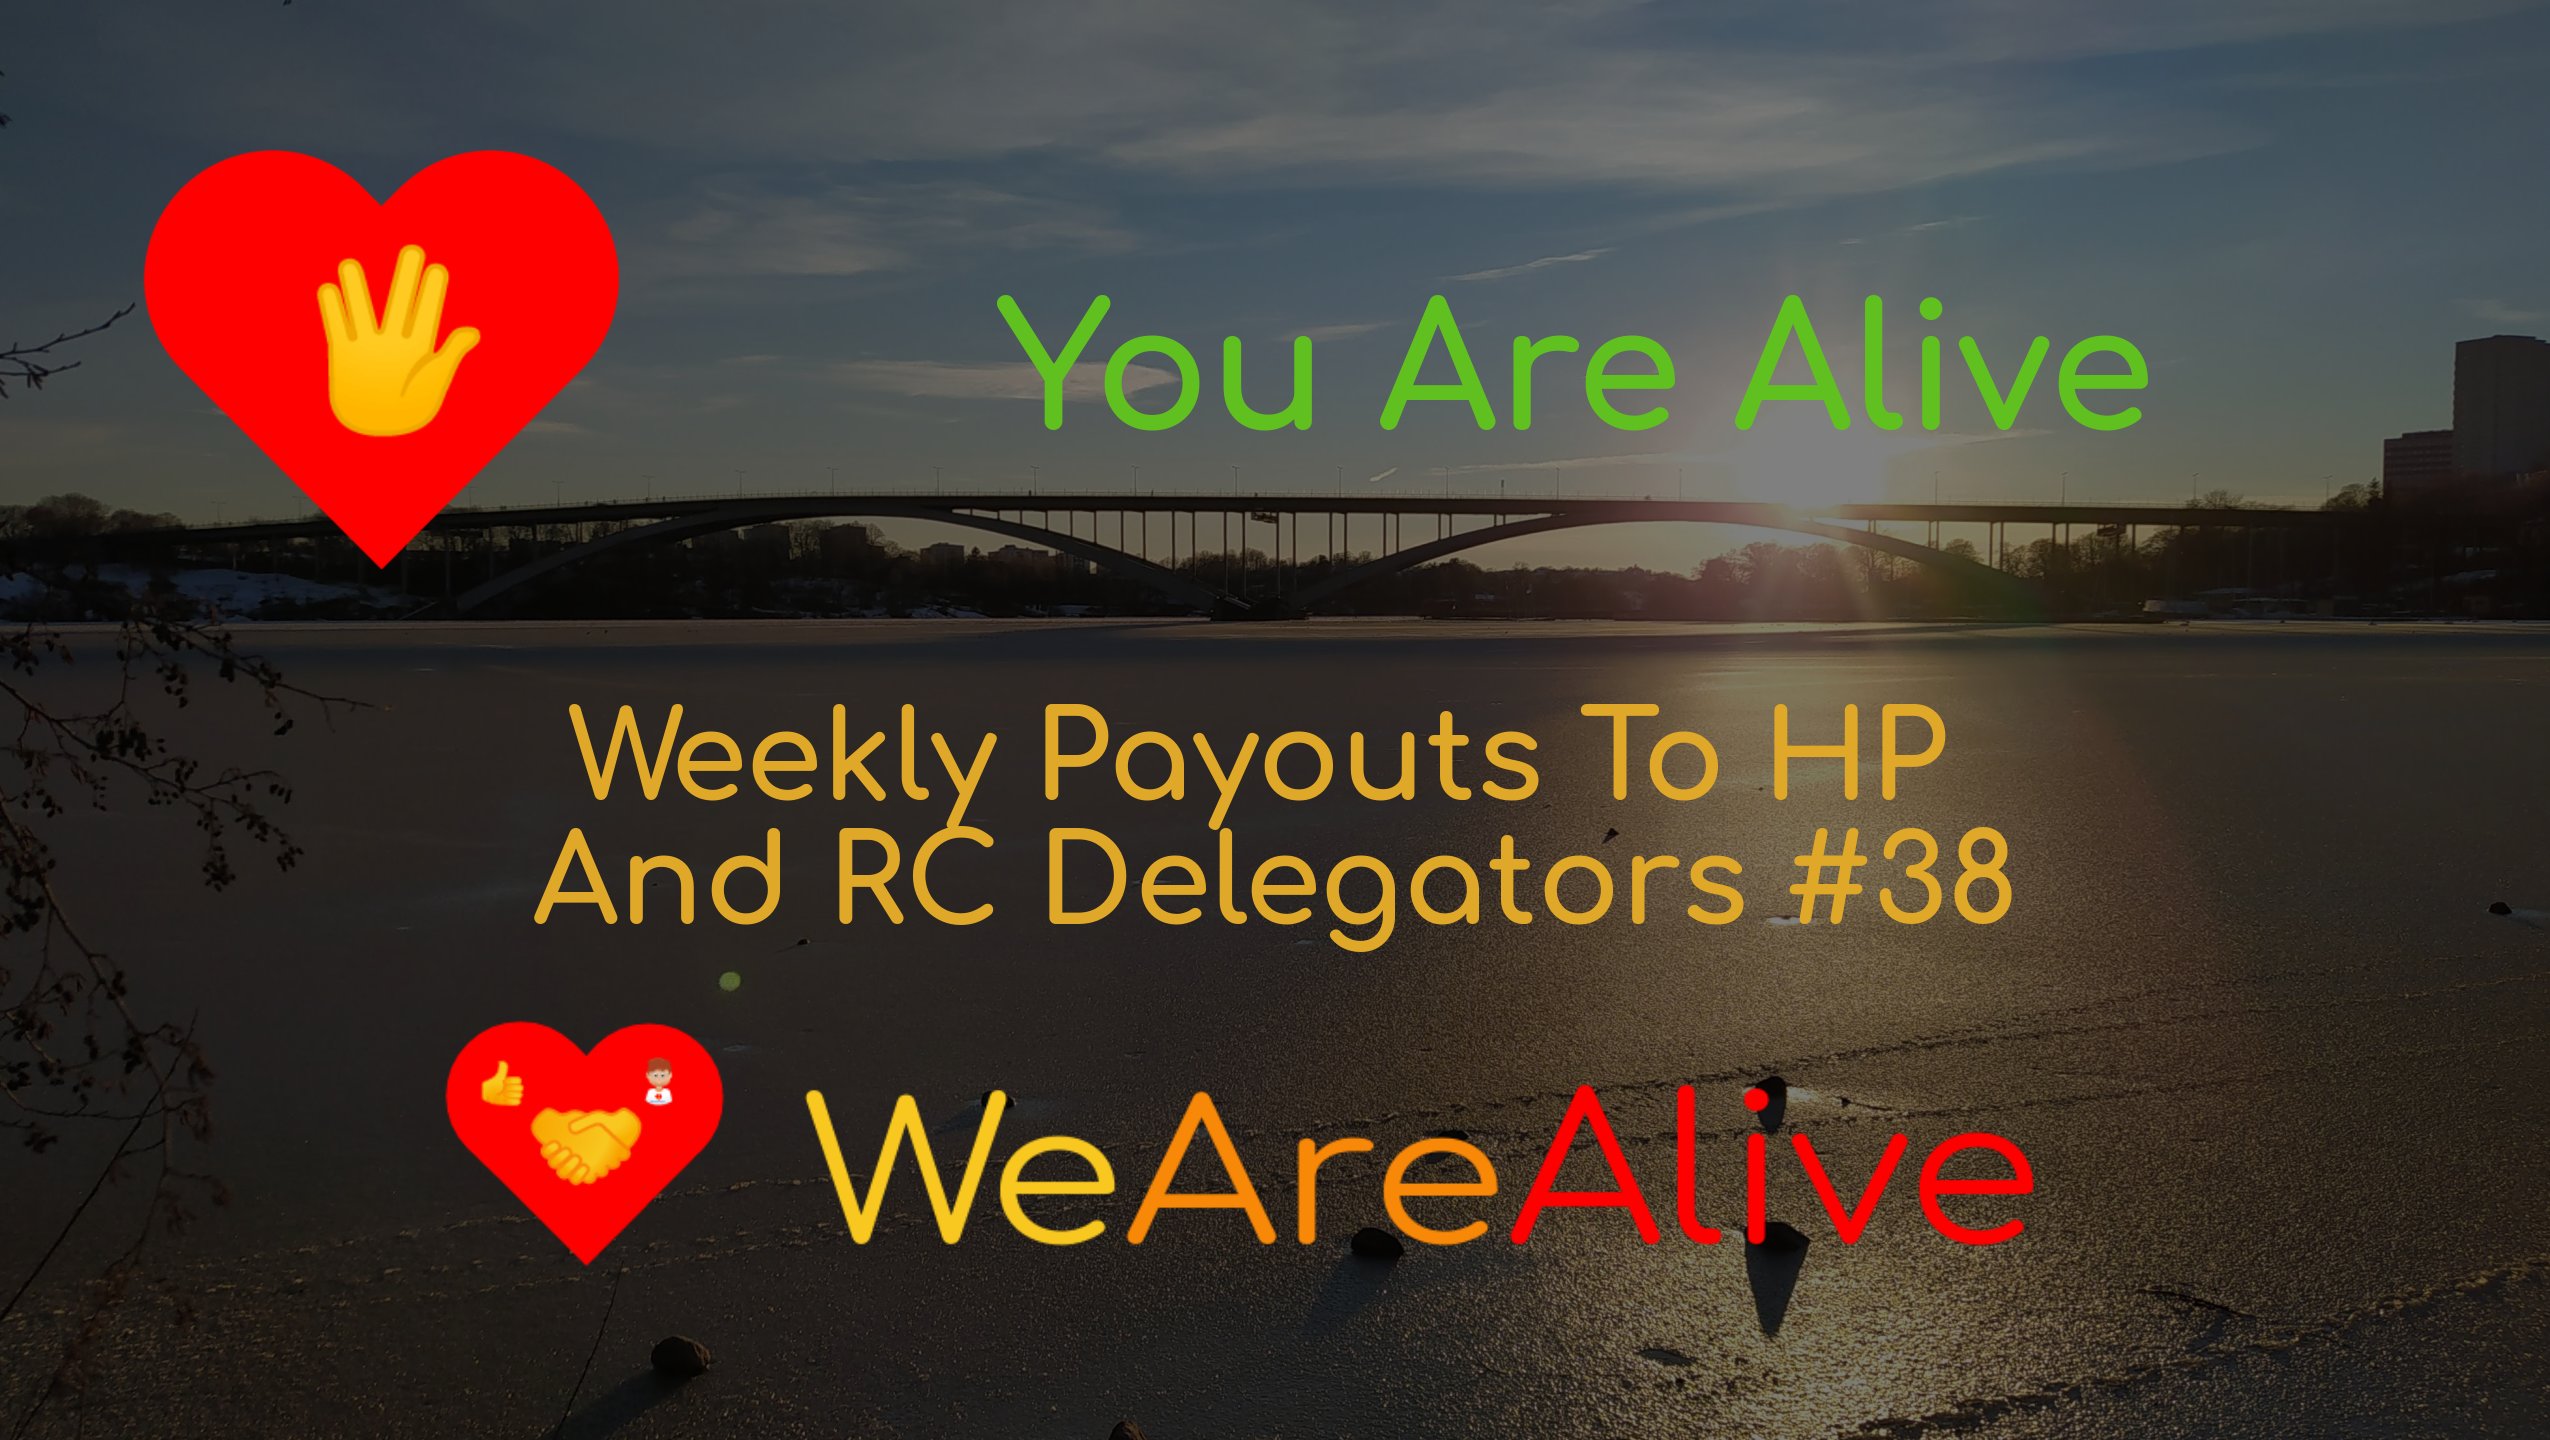 @youarealive/you-are-alive-weekly-payouts-to-hp-and-rc-delegators-38